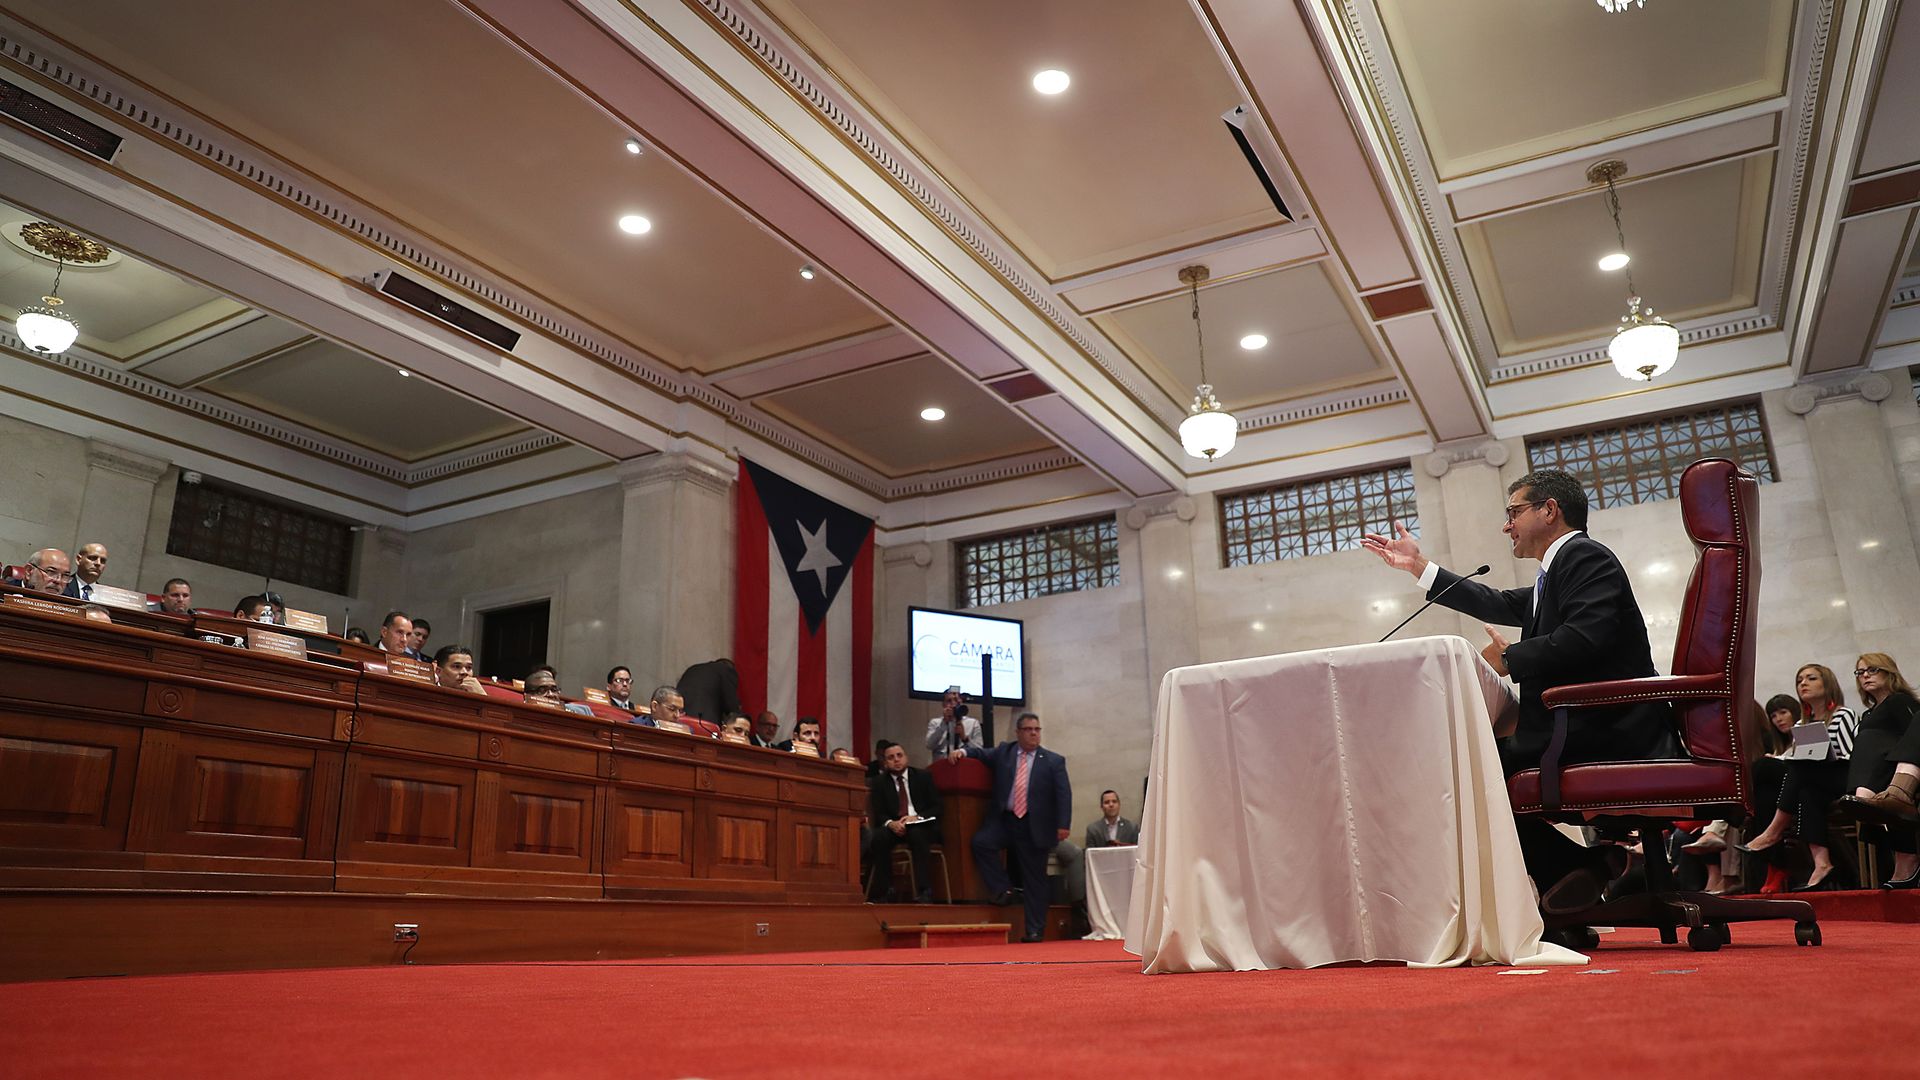 In this image, Pedro sits in the Puerto Rican House of Representatives and speaks to a panel